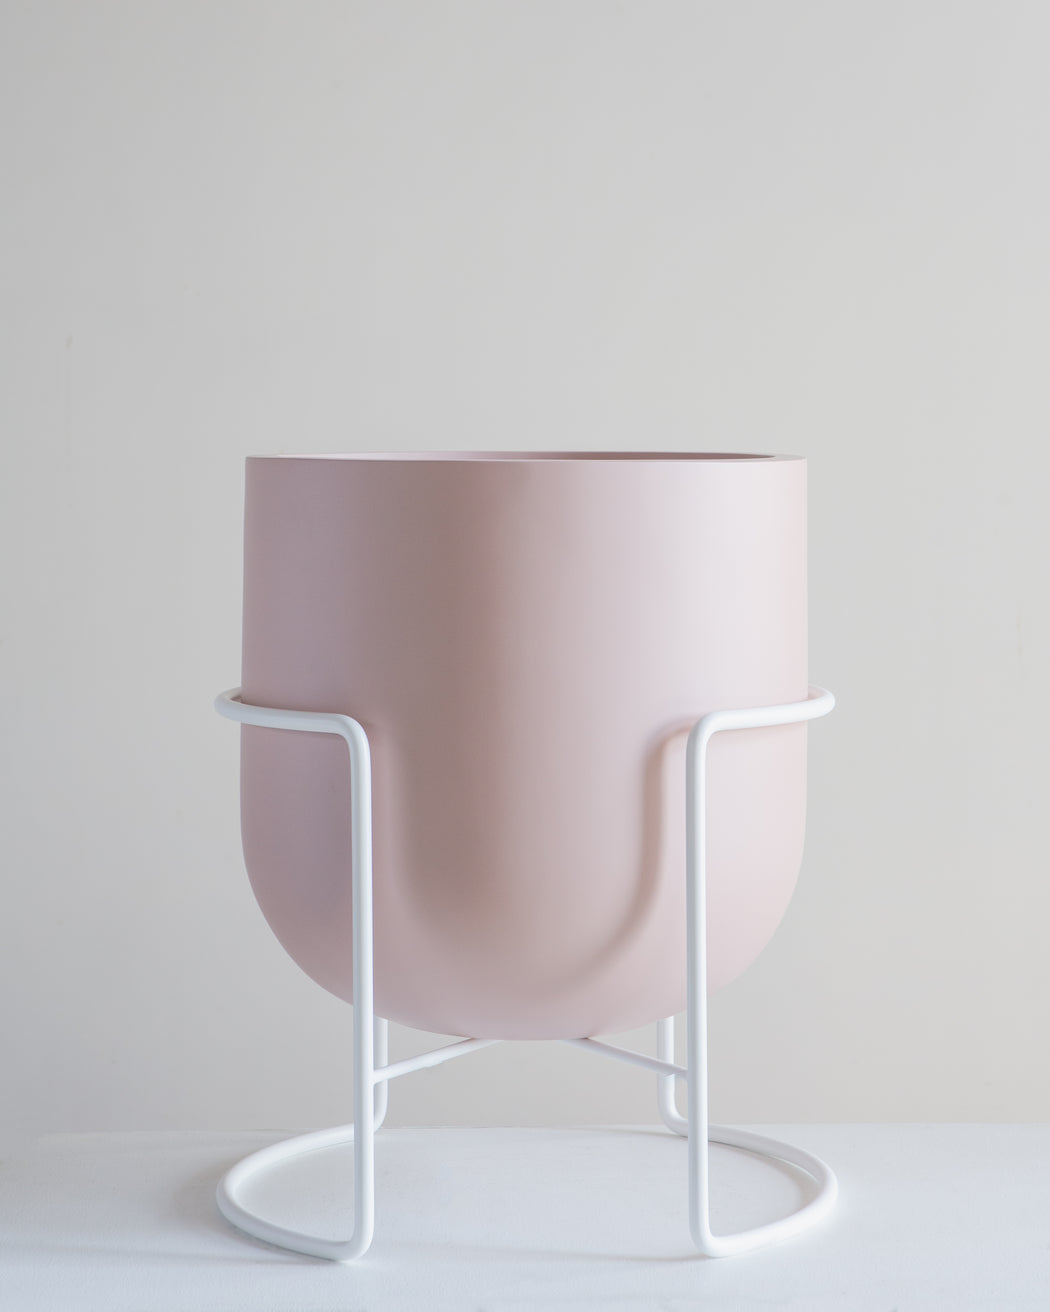 ROTUNDA WITH STAND - PINK SALT / White Stand, Large 16.3 x 16.3 x 19.9 in